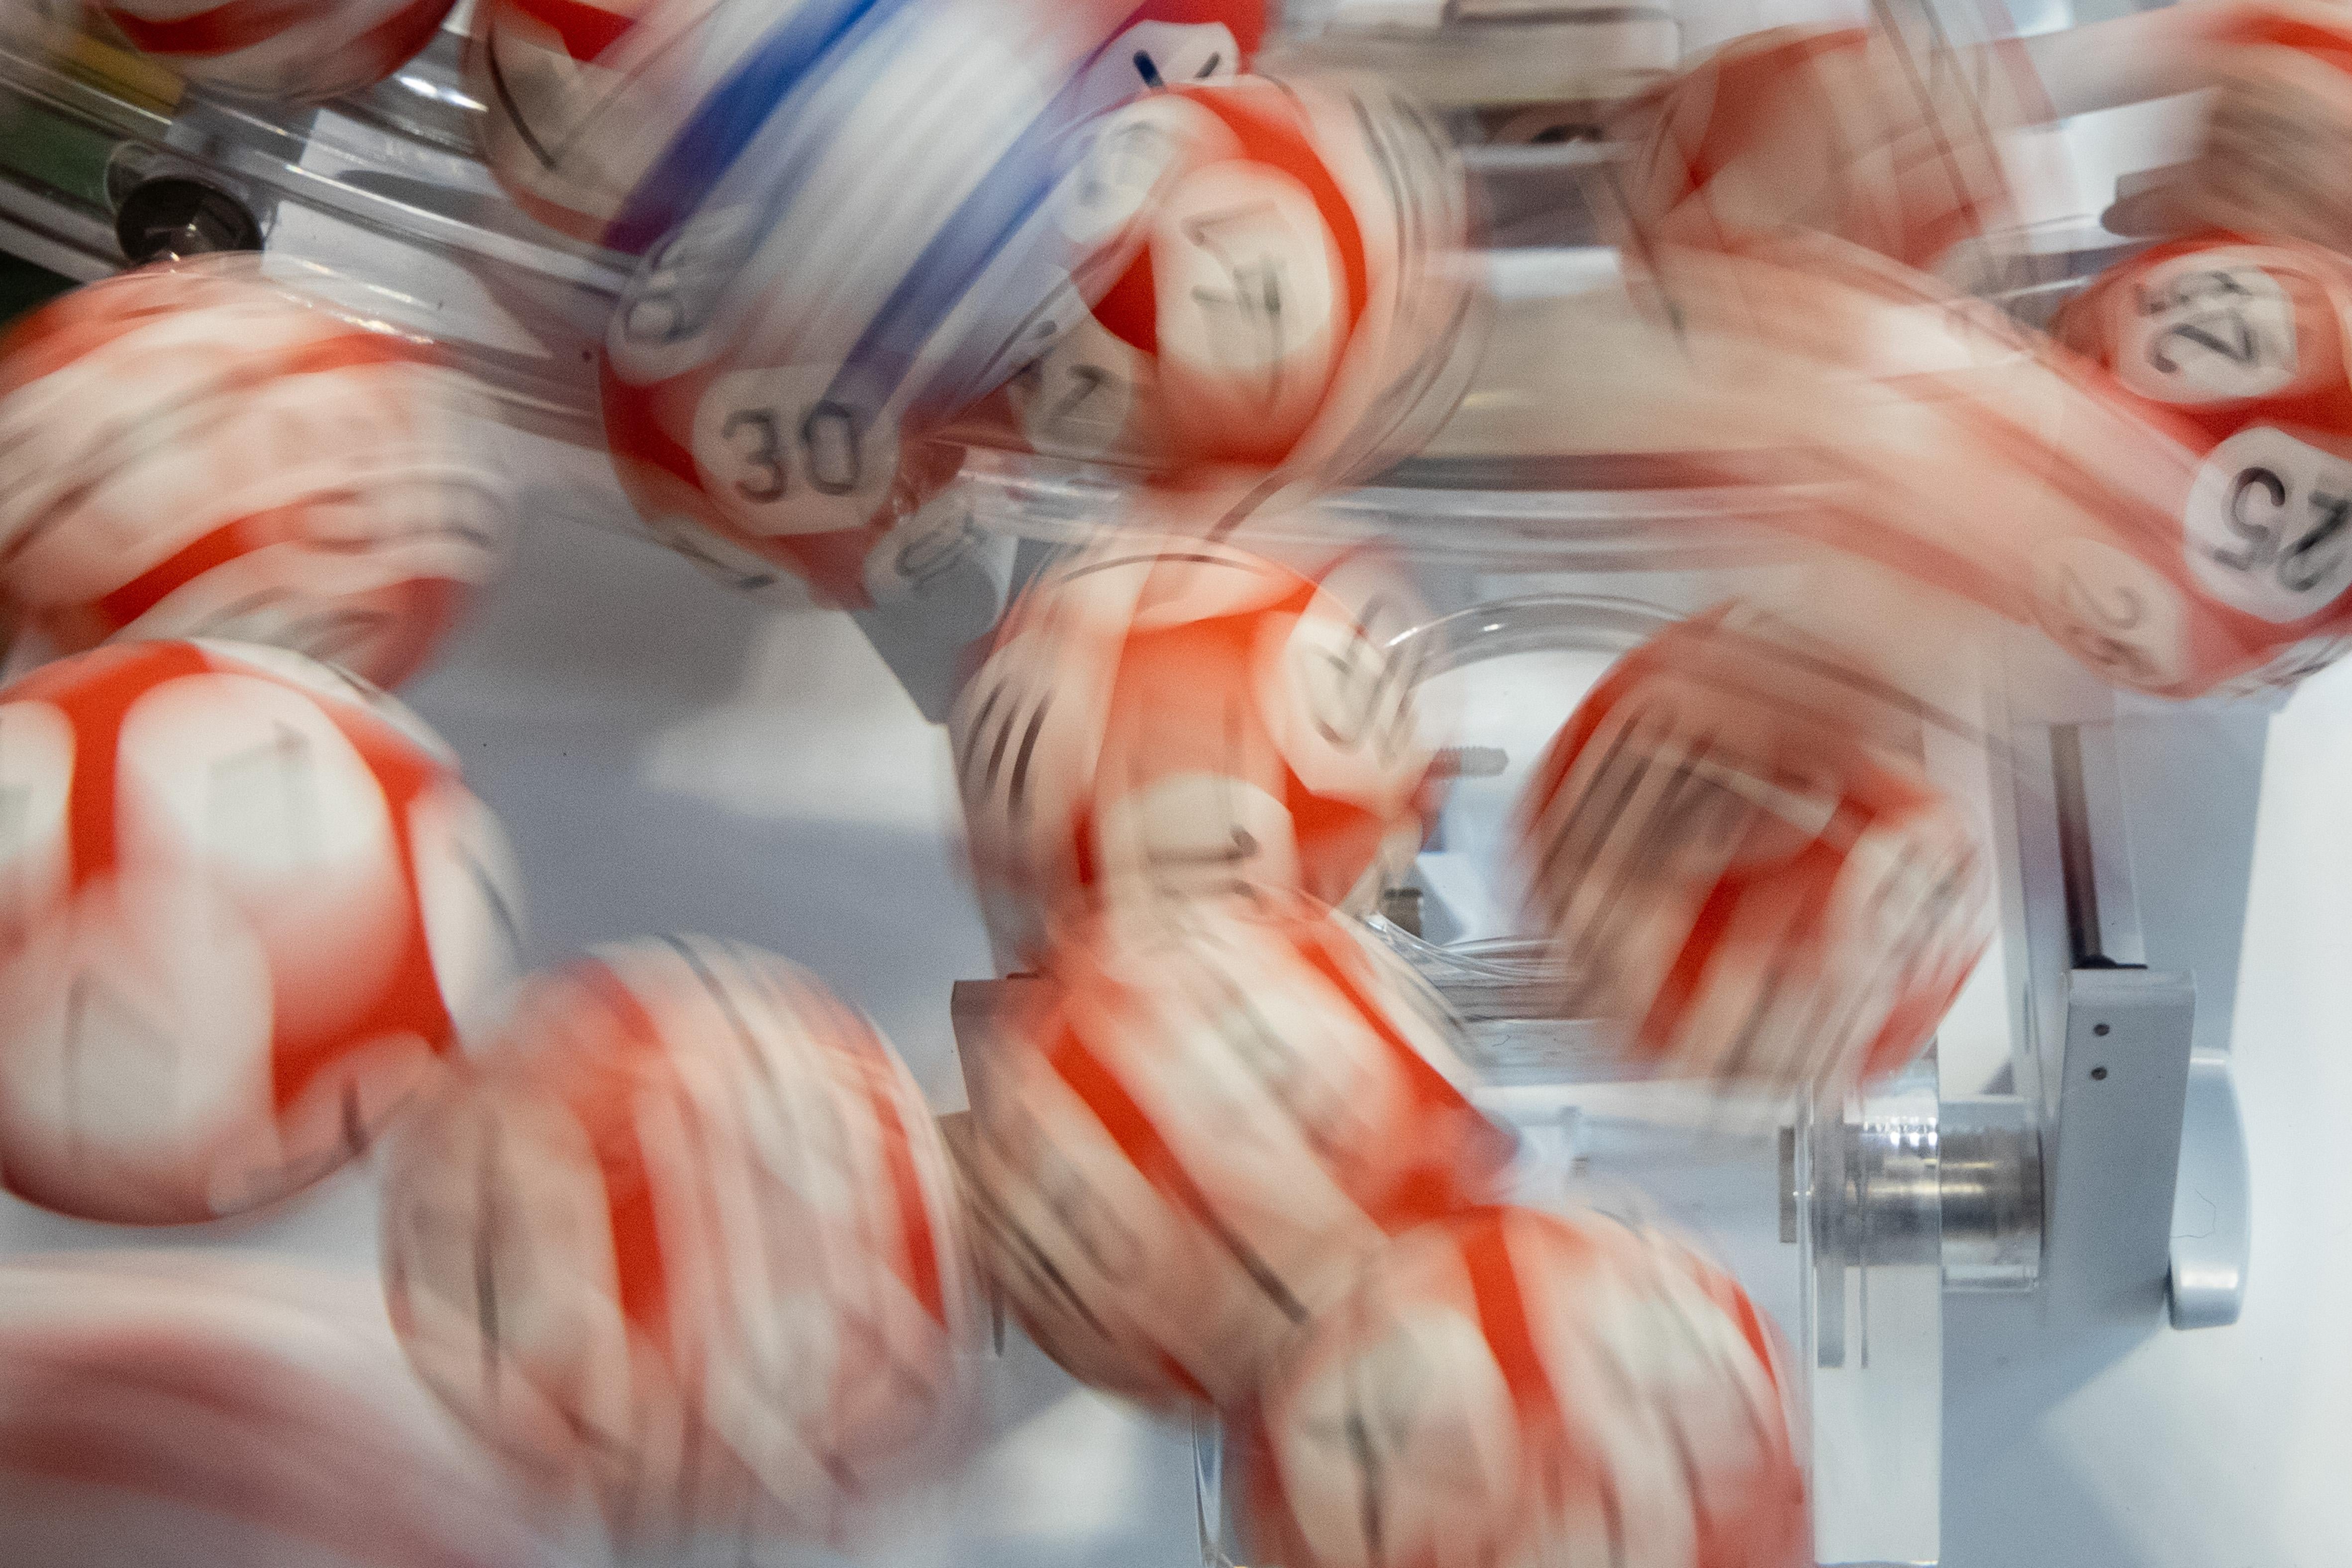 A close-up, blurry photo of numbered lottery balls in motion before being drawn.